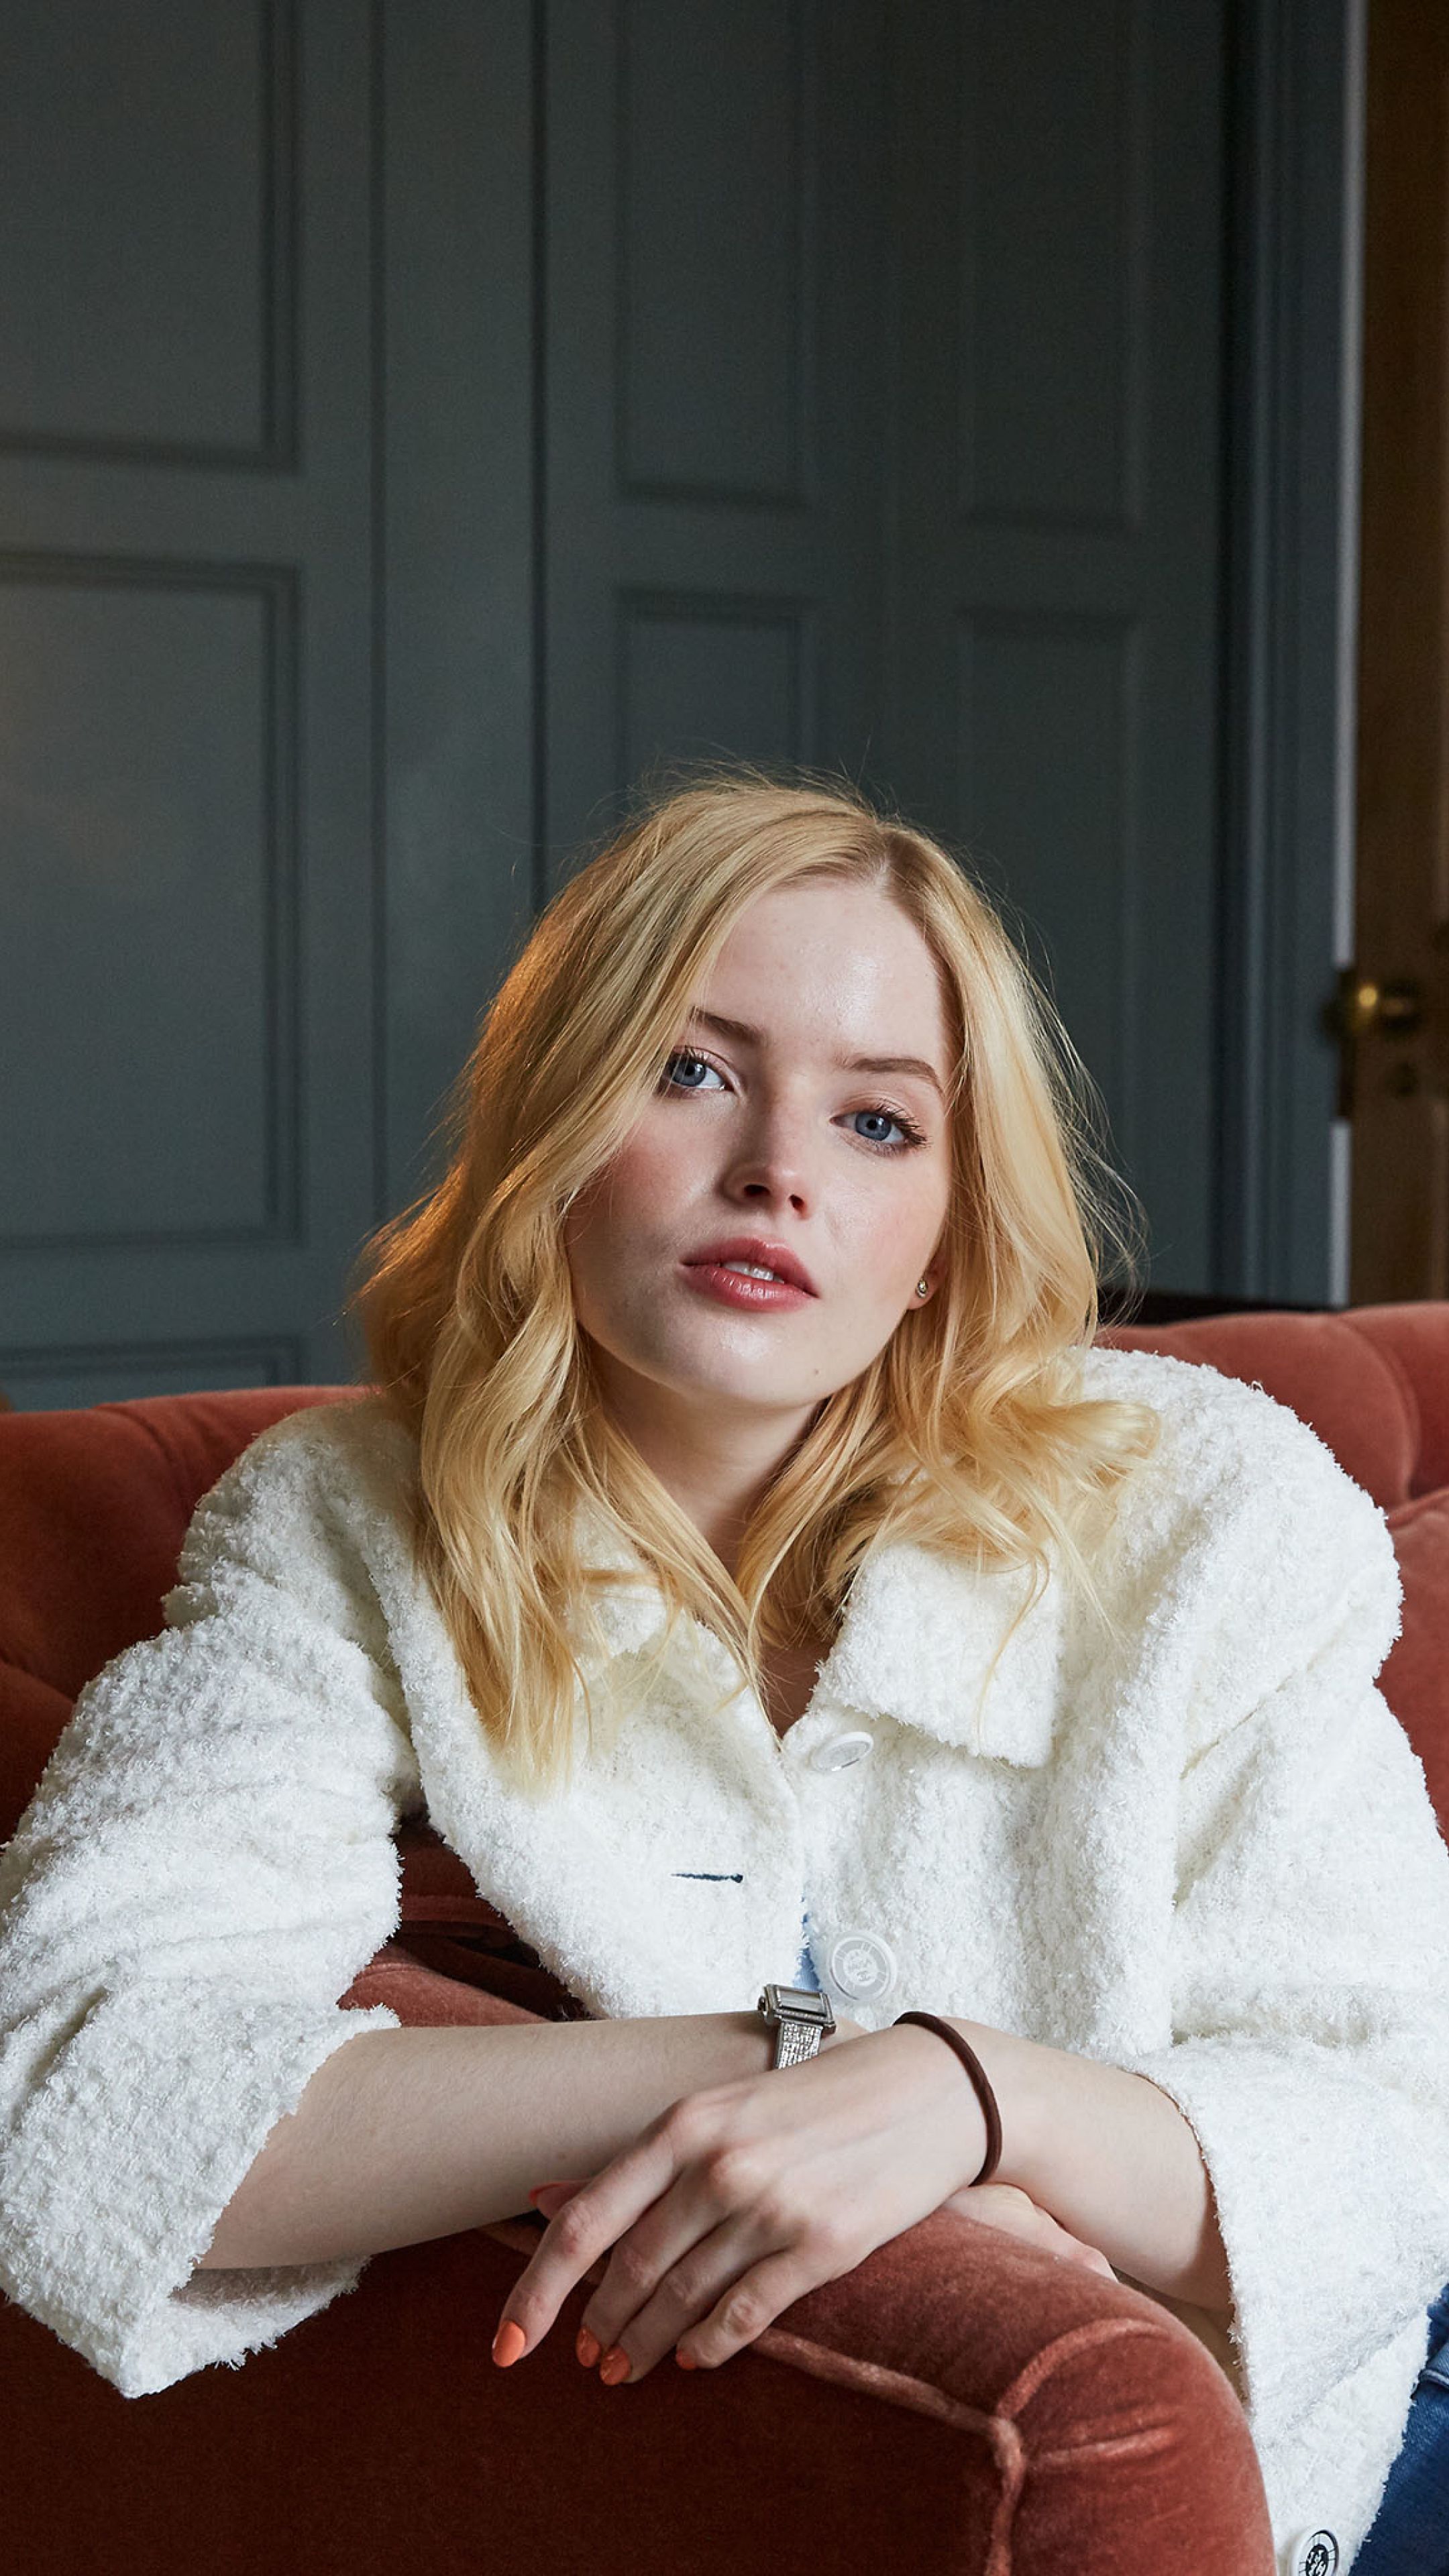 Ellie Bamber 2019 Sony Xperia X, XZ, Z5 Premium Wallpaper, HD Celebrities 4K Wallpaper, Image, Photo and Background